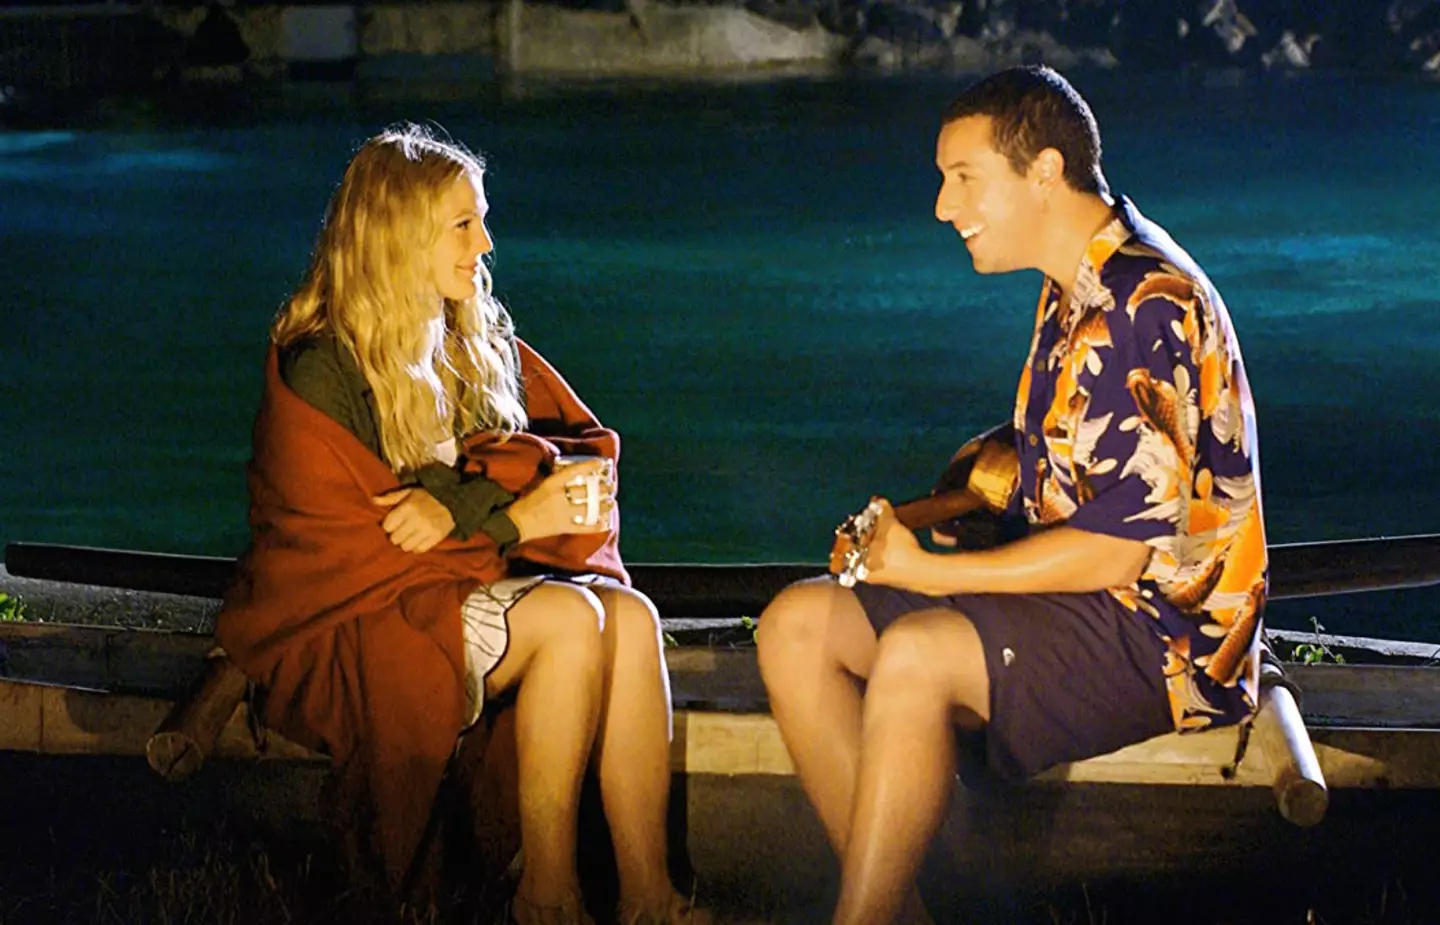 Barrymore and Sandler worked together on 50 First Dates.